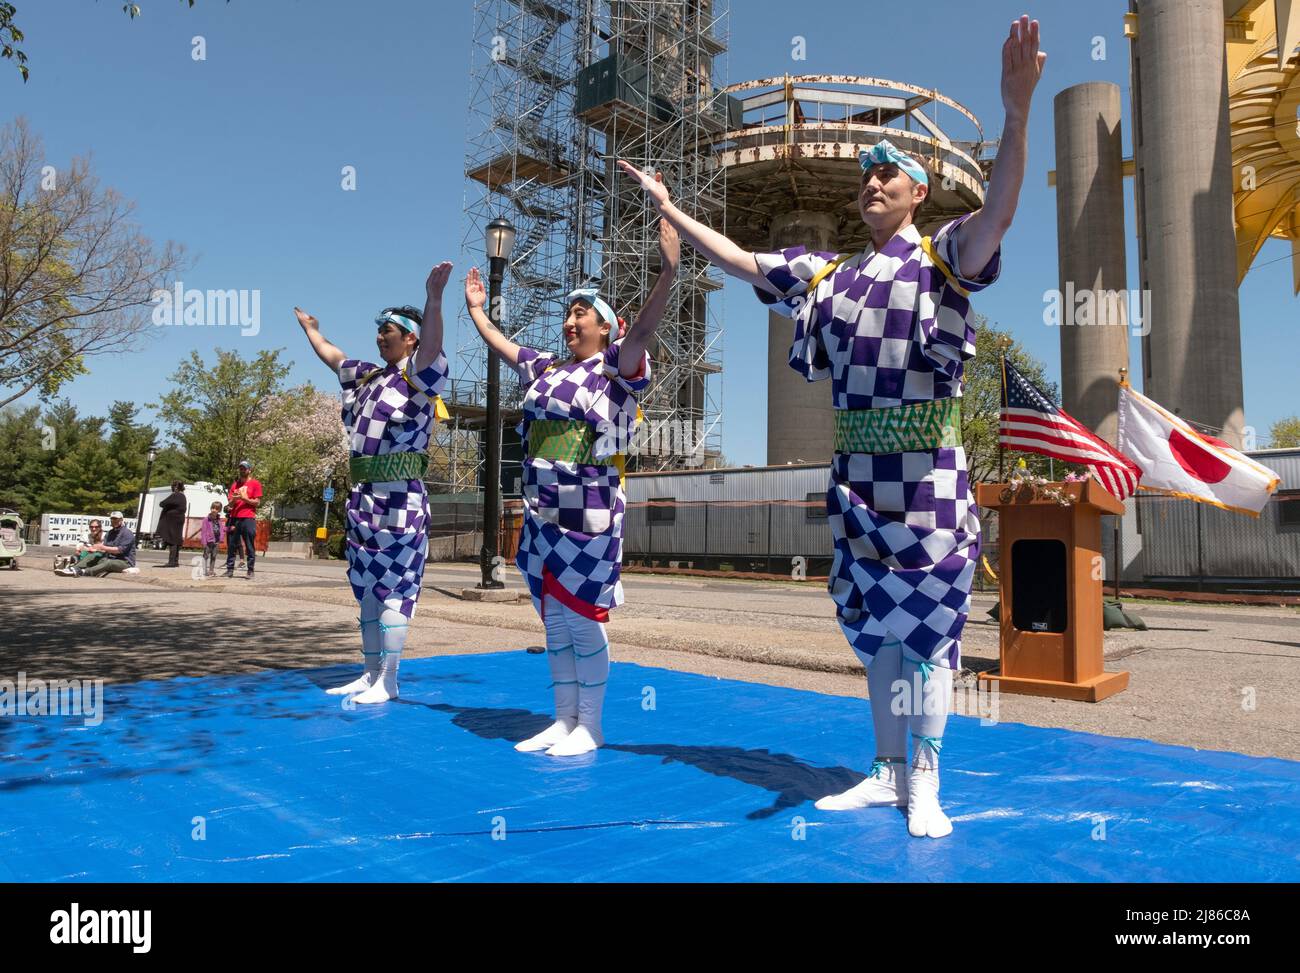 Dancers from the Japanese Folk Dance institute at the Sakura Matsuri celebration of cherry blossoms & the US Japanese friendship. In Queens, New York. Stock Photo